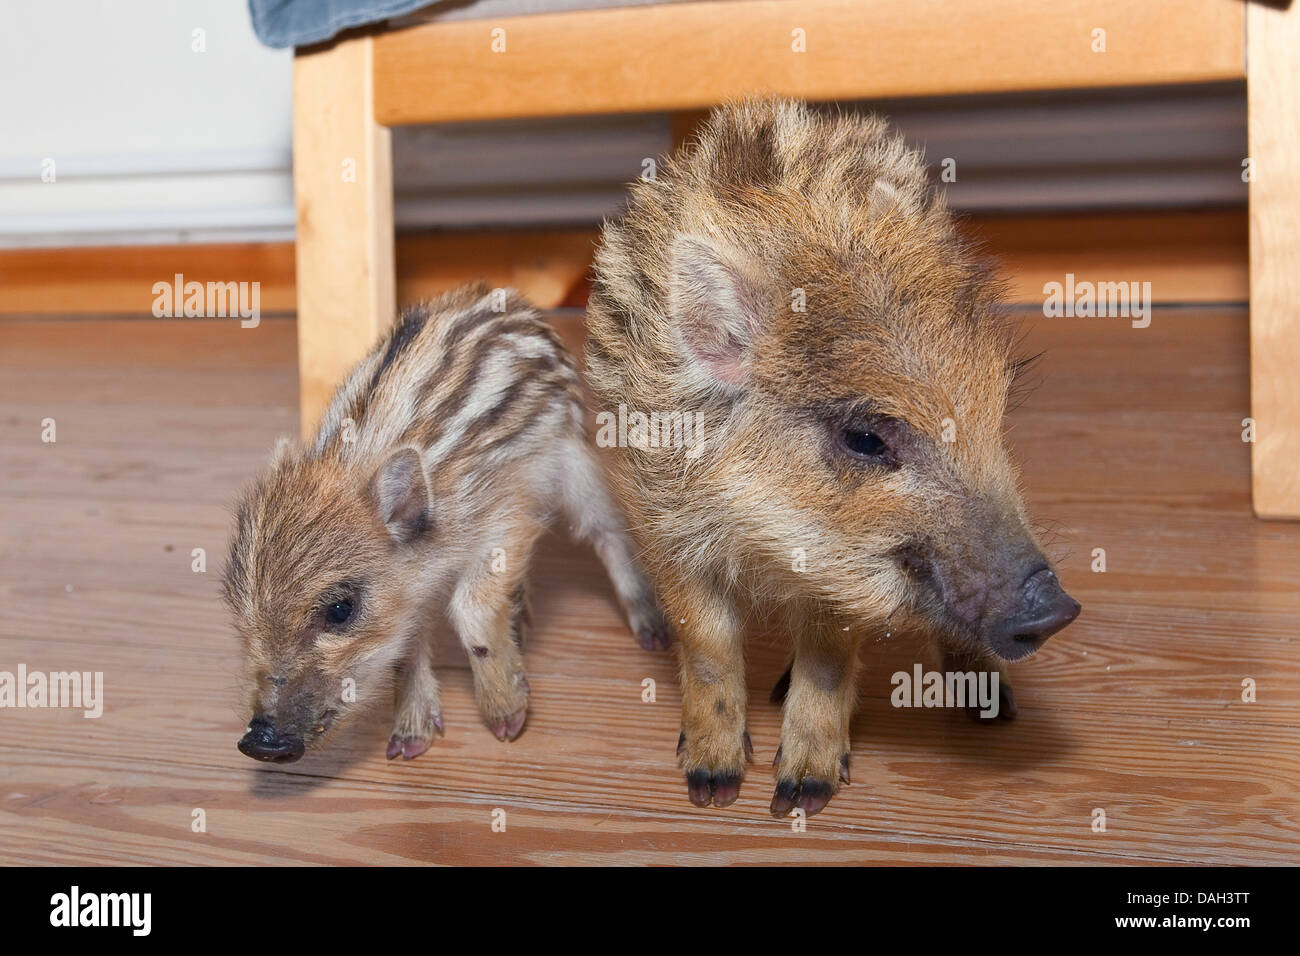 wild boar, pig, wild boar (Sus scrofa), two orphaned tame runts playing in the living room, Germany Stock Photo